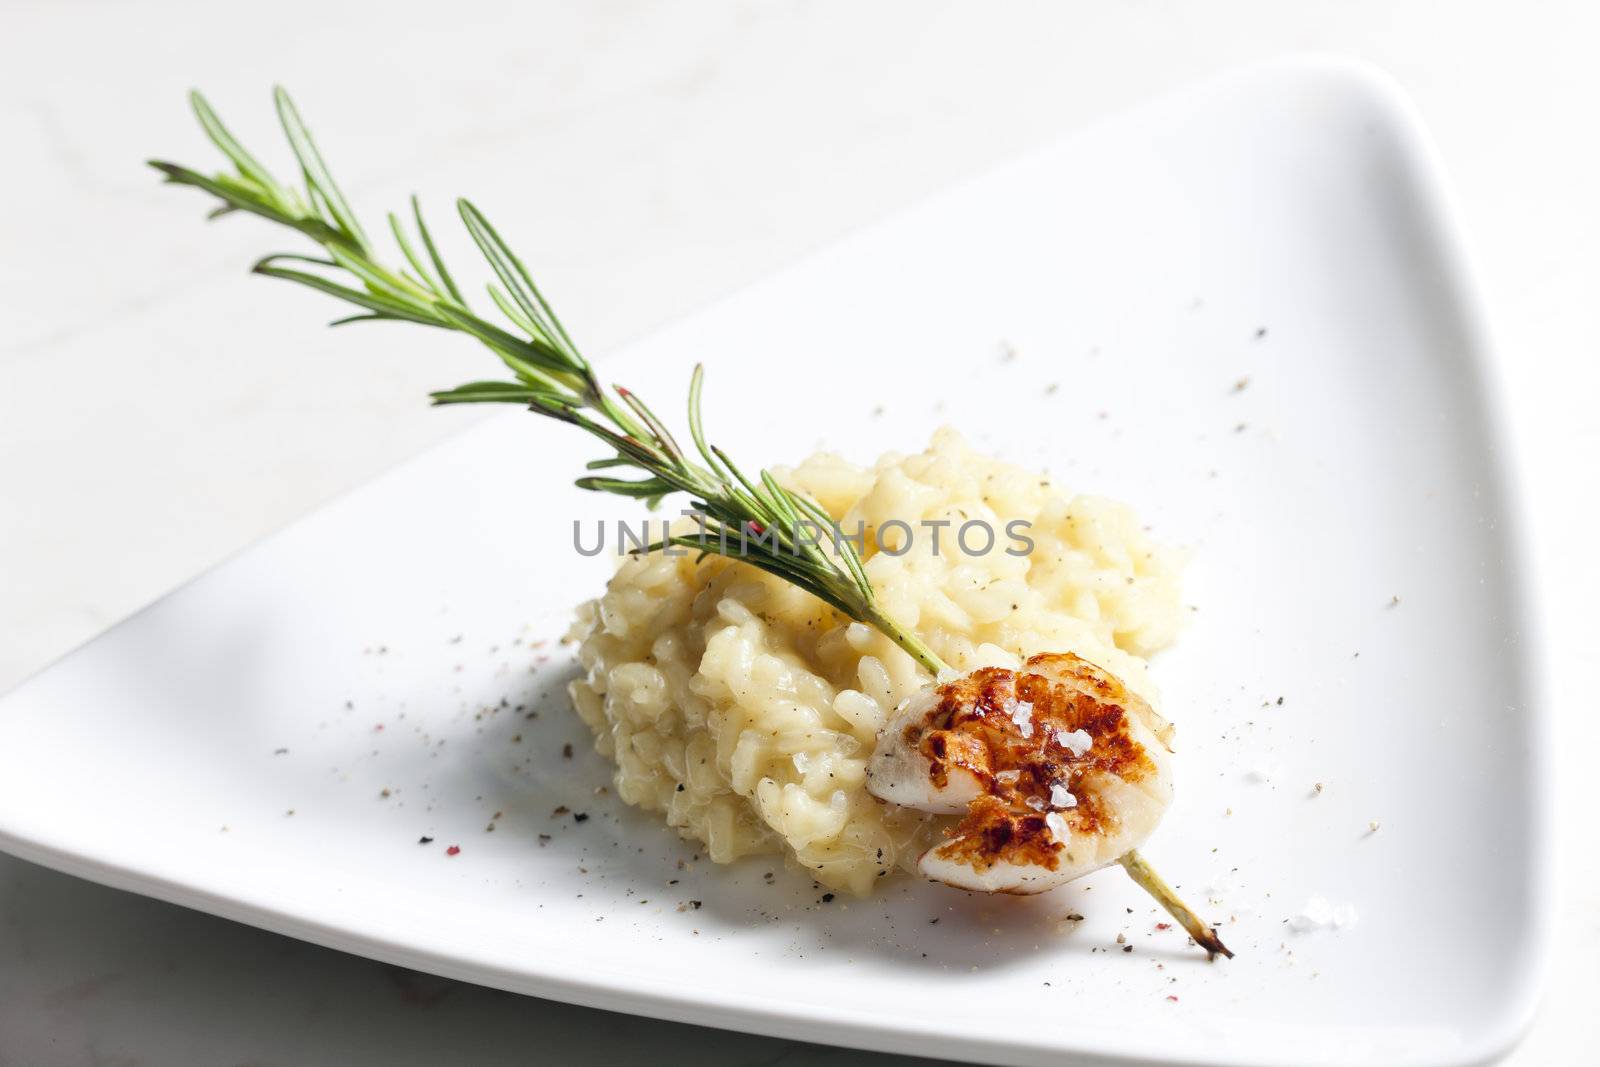 grilled Saint Jacques mollusc on rosemary needle with risotto